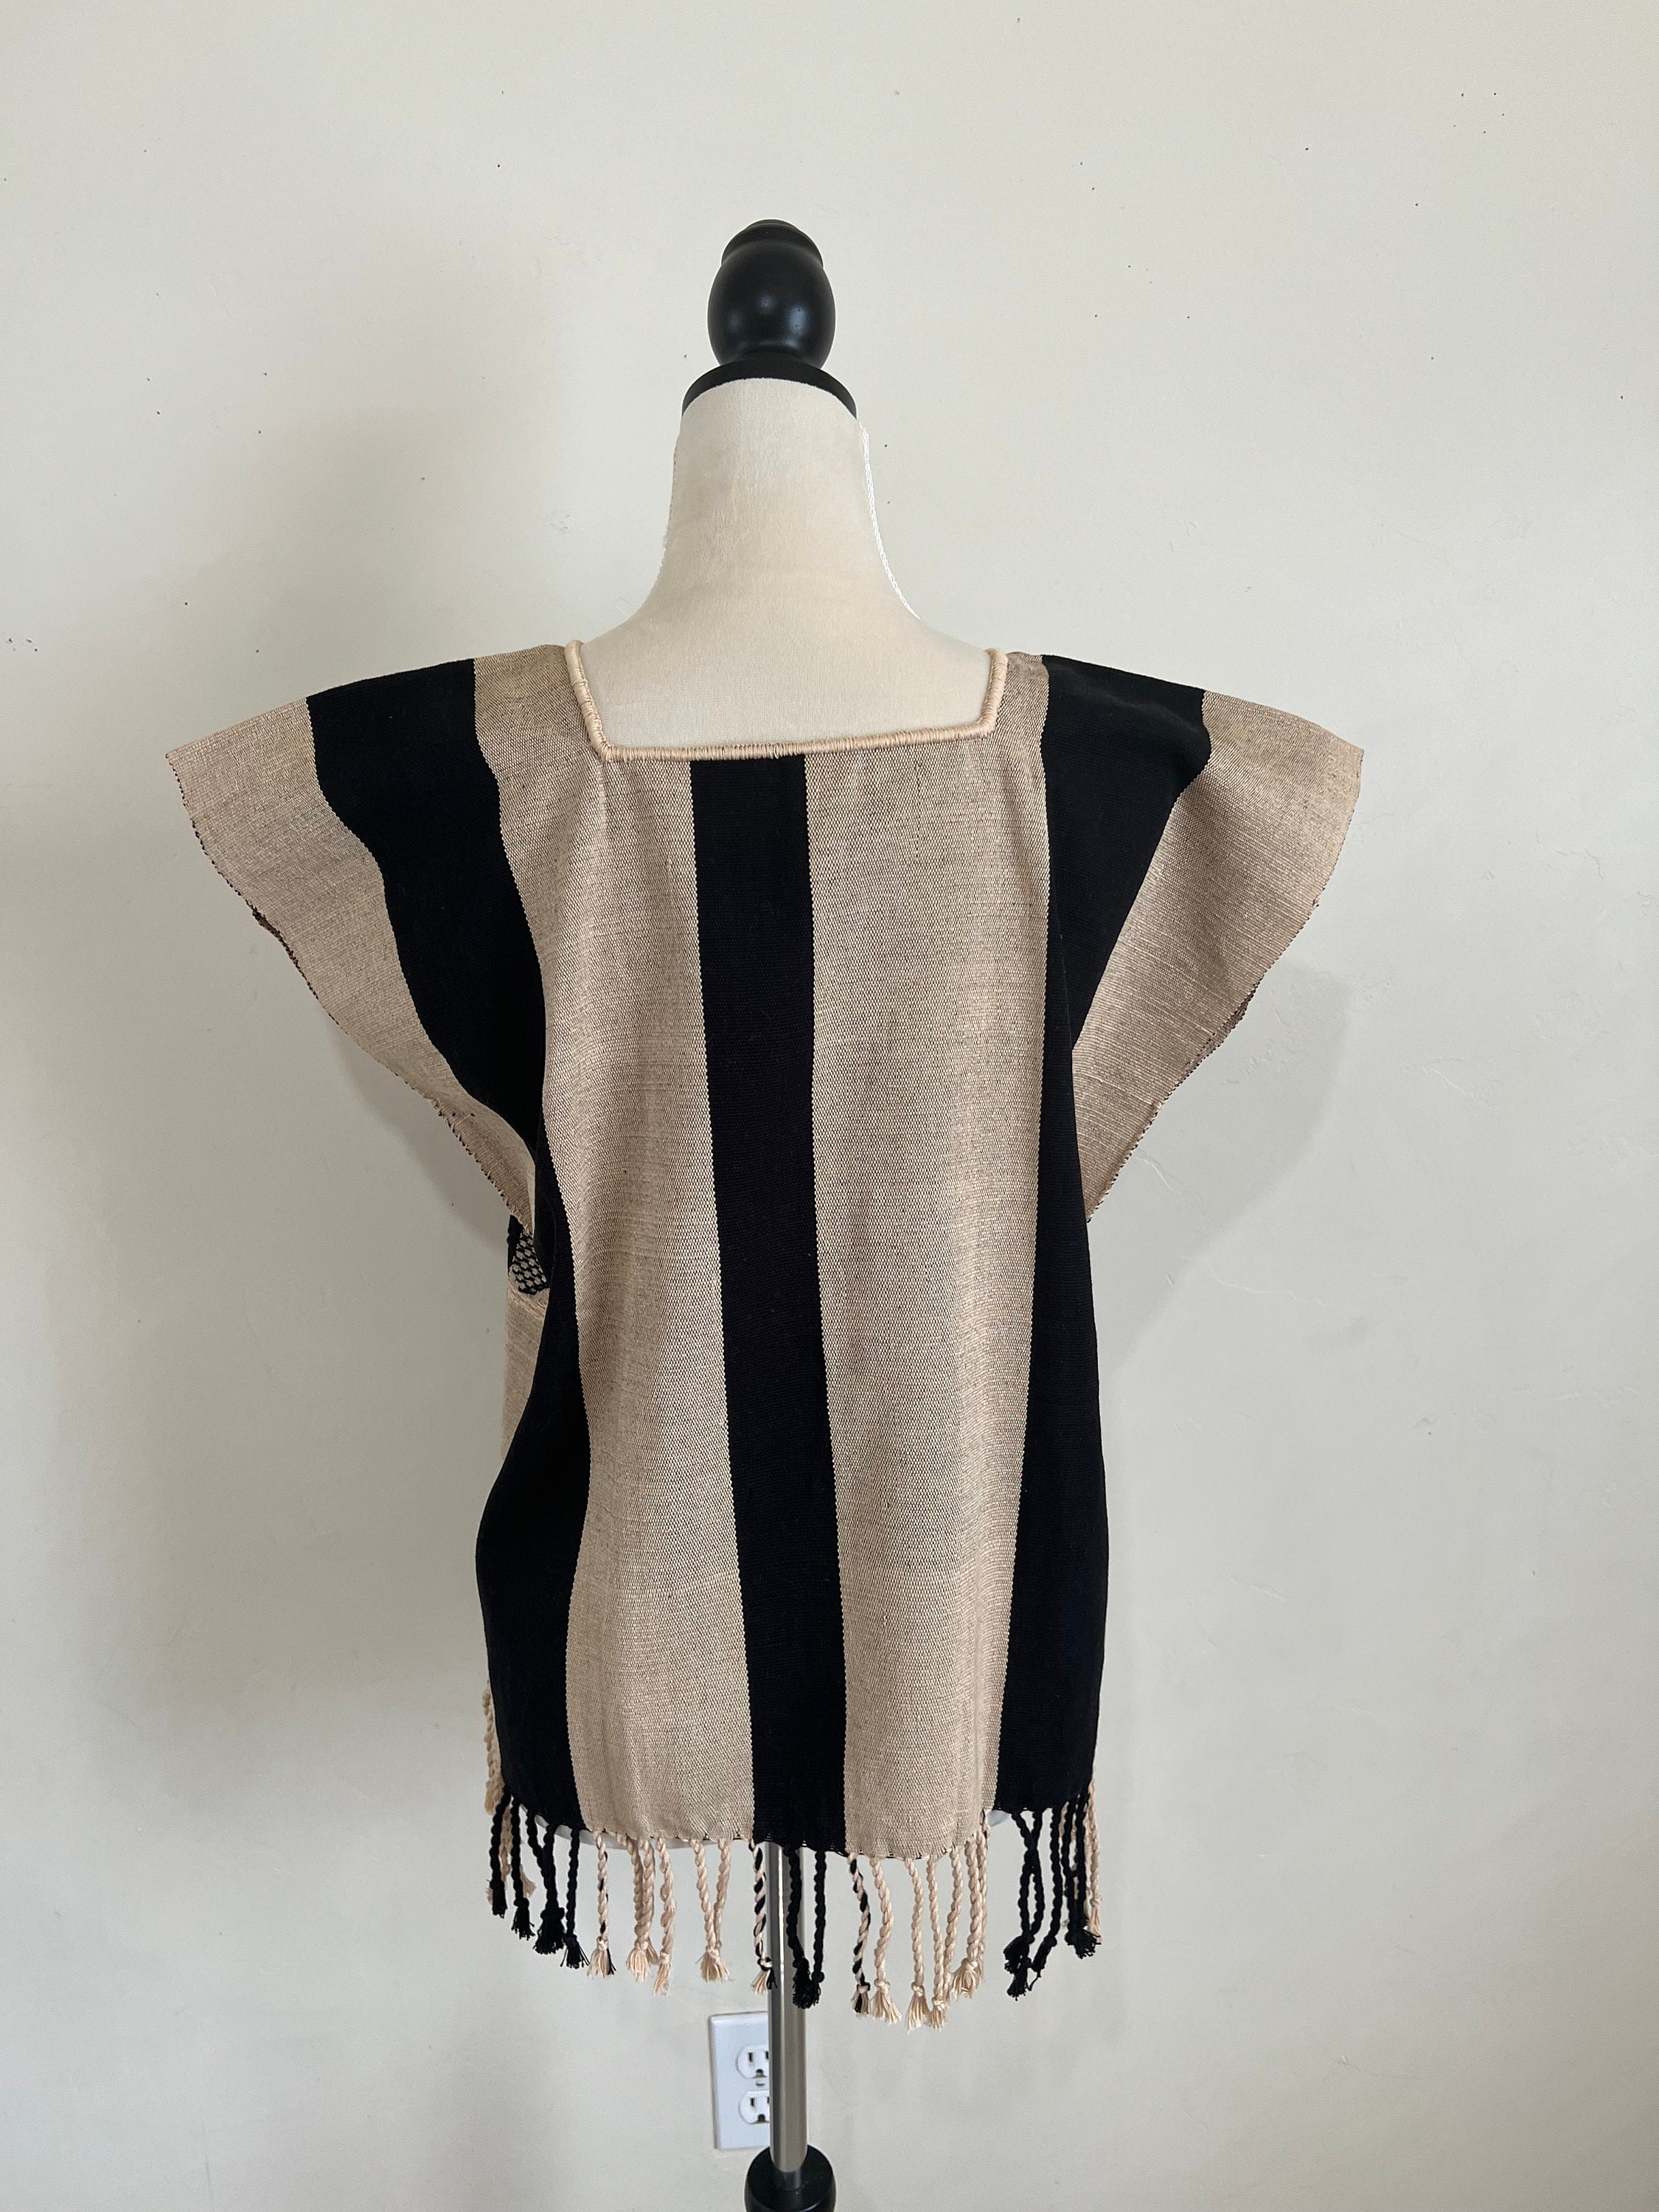 Artisanal Mexican Blouse, Blouse Handmade on a Backstrap Loom, Mexican ...